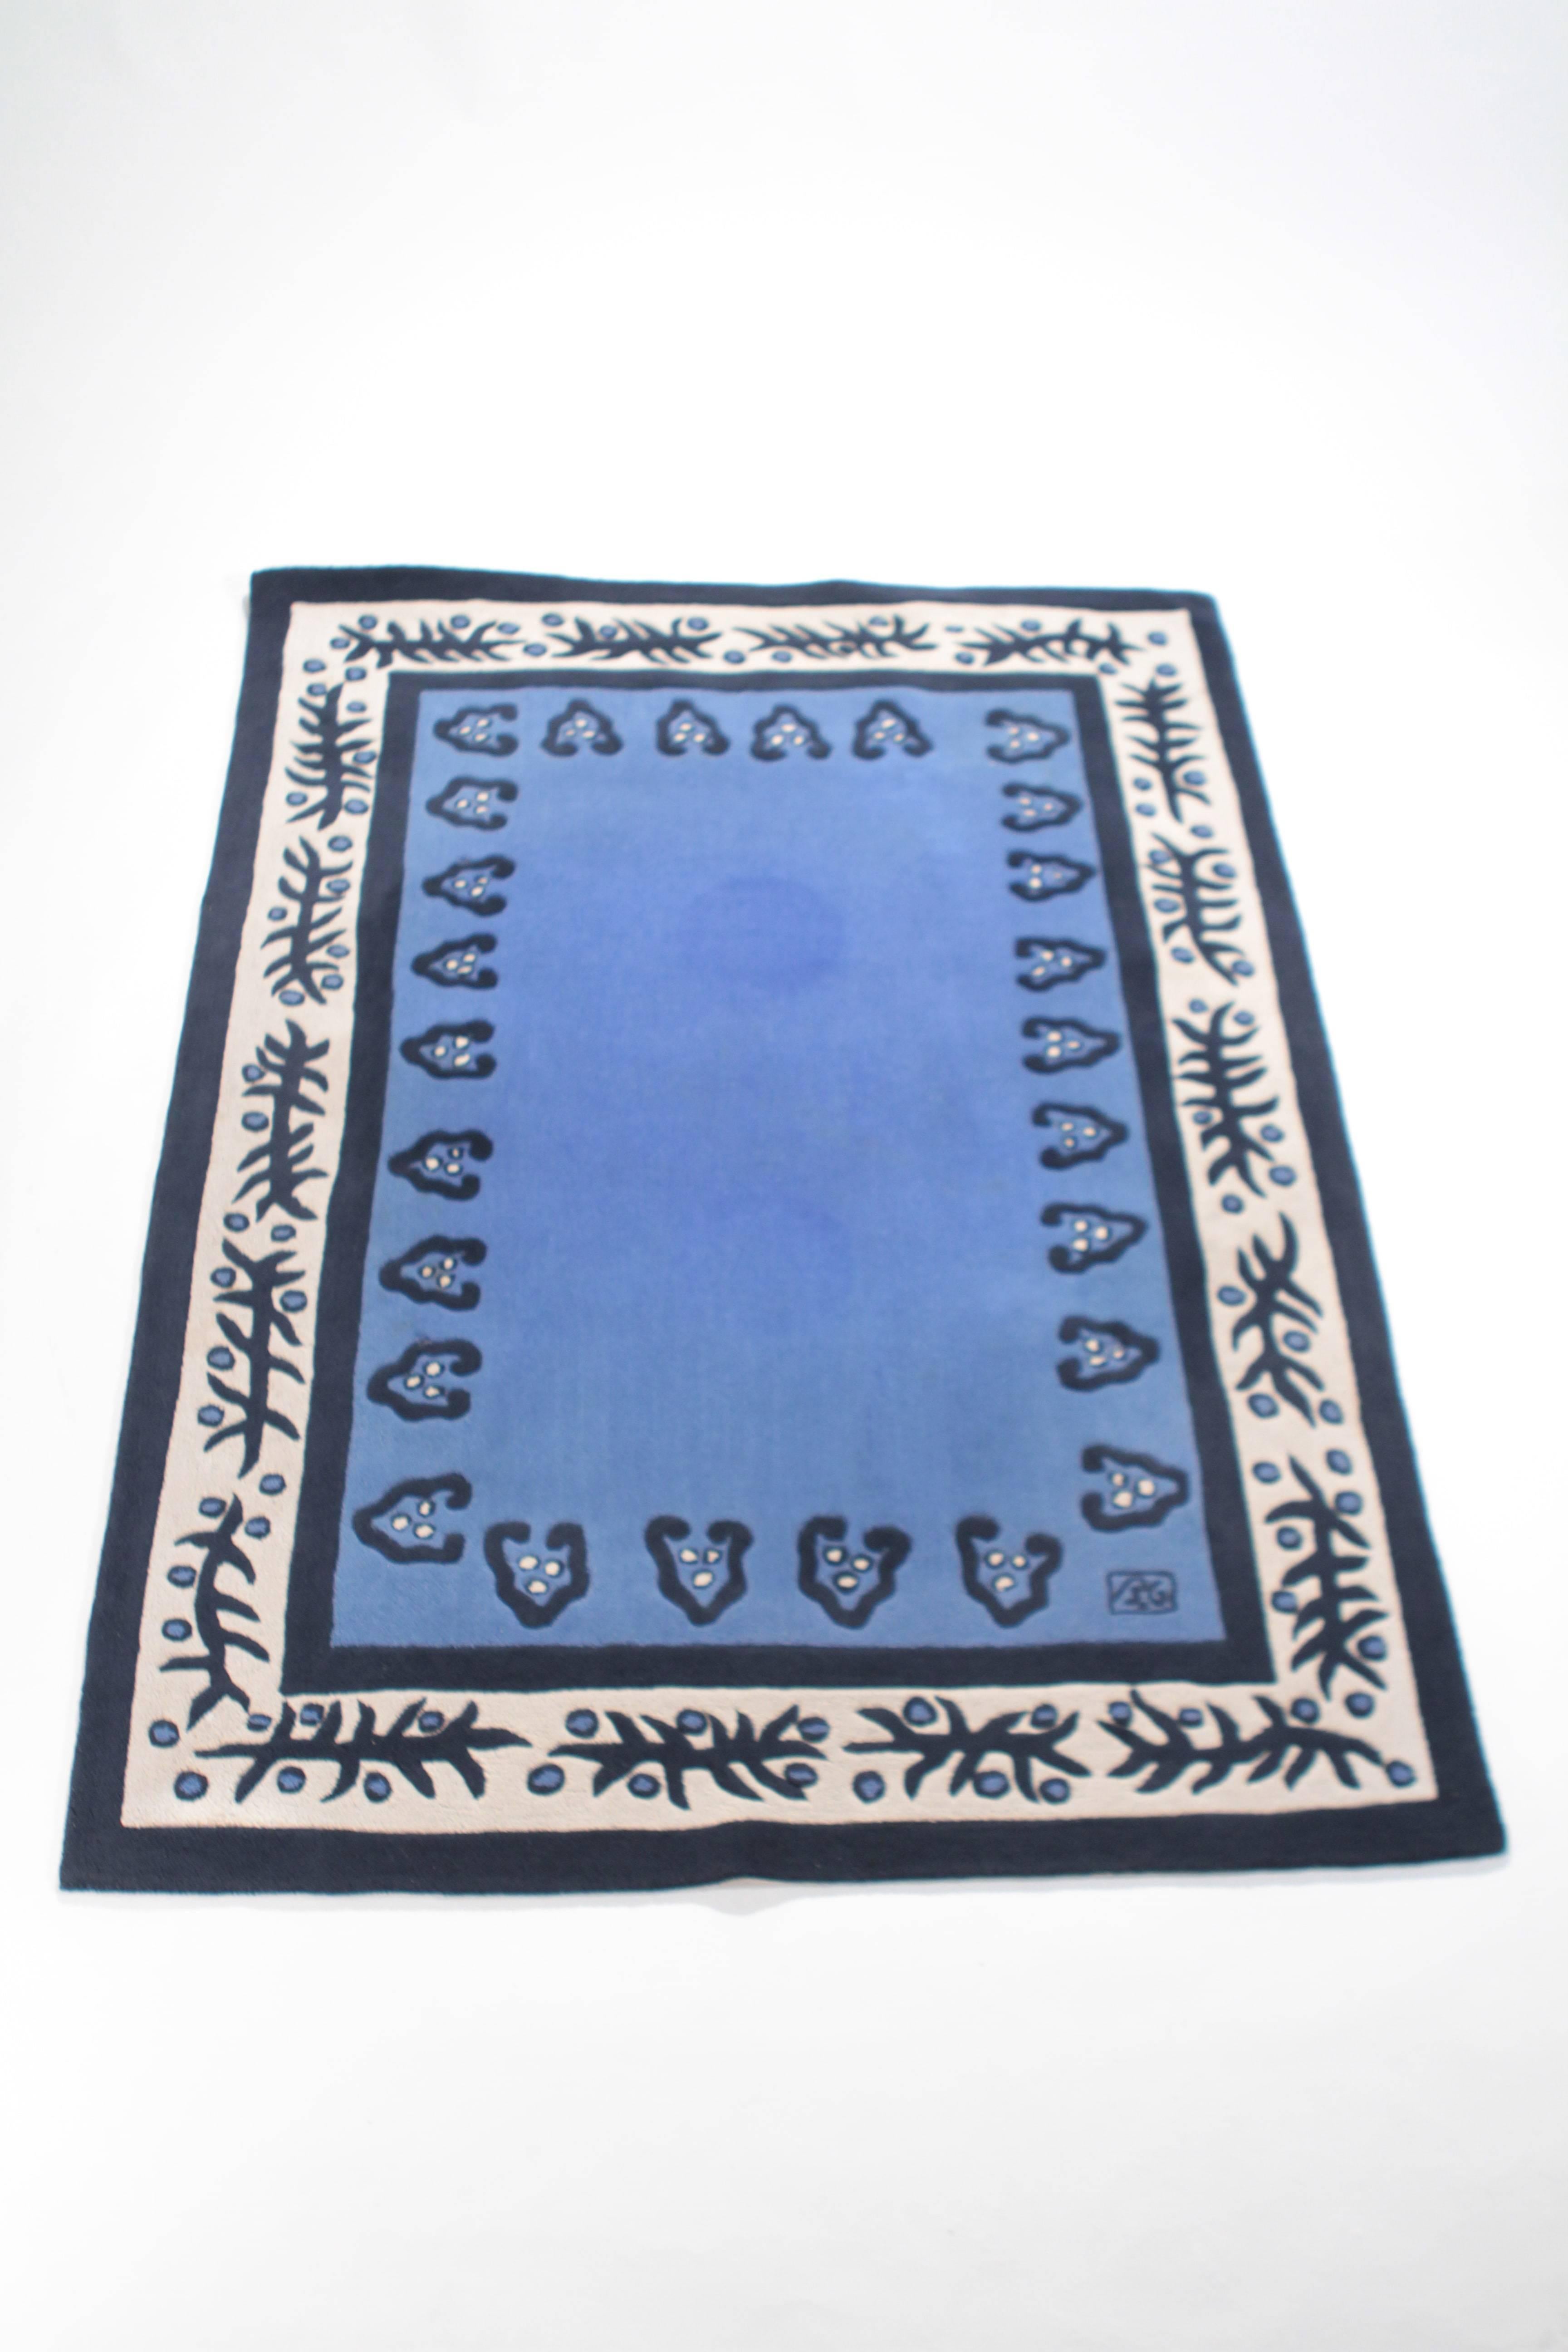 Rêverie carpet designed by Garouste and Bonetti in tufted wool, manufactured by Sam Laïk in 1993. This beautiful piece features a very poetic blue pattern and is signed BG.
This rug has been professionally cleaned, and few marks from previous use